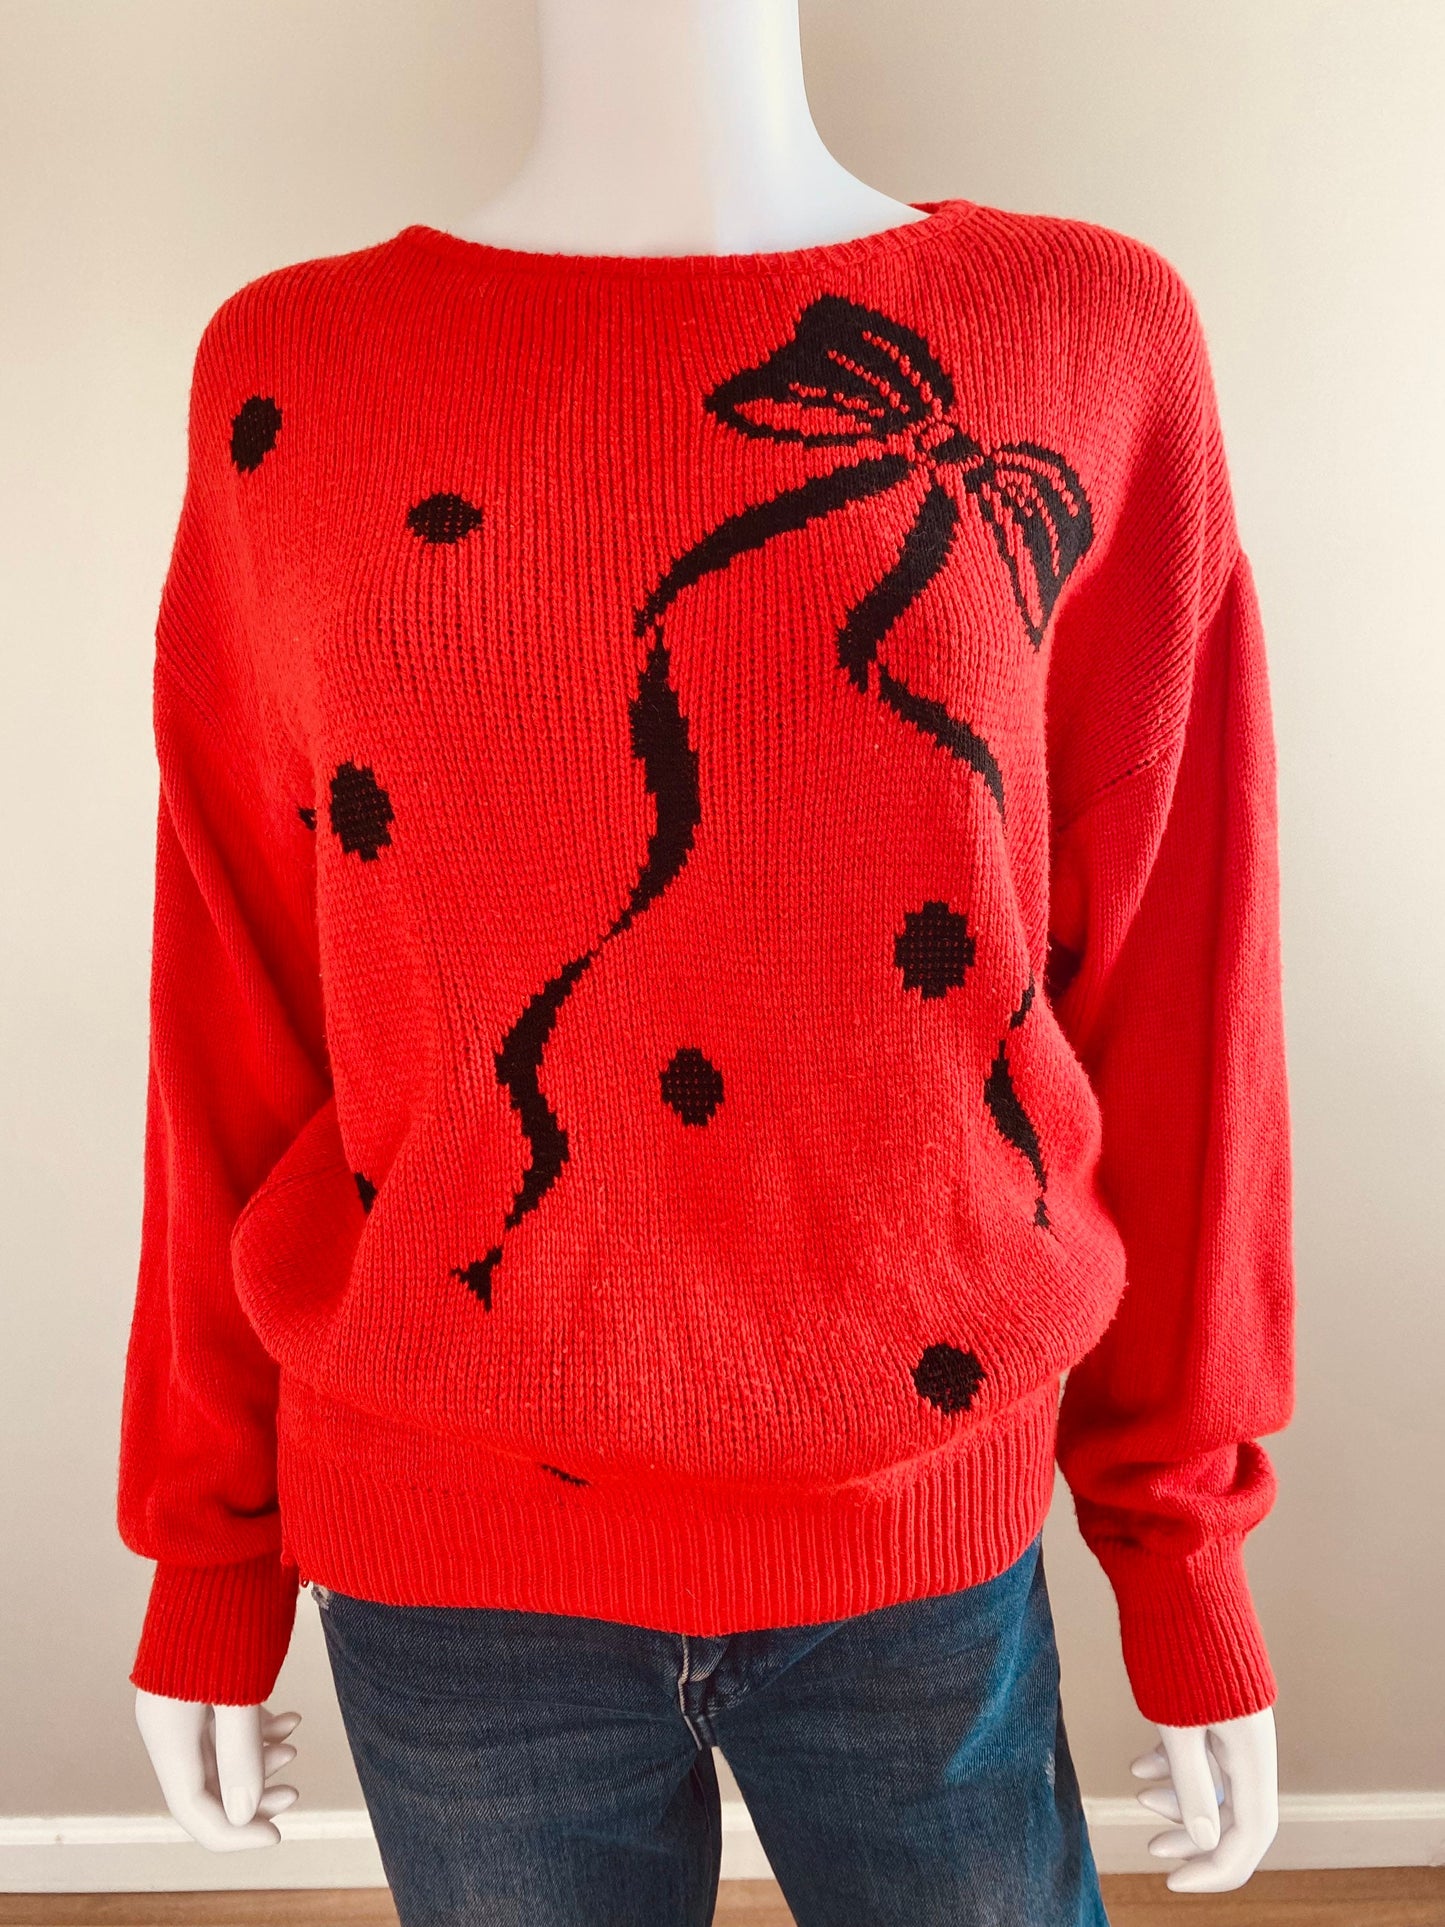 Vintage 1980s Red Novelty Print Sweater / 80s bow print sweater / holiday sweater / Intarsia sweater / Size XS to M